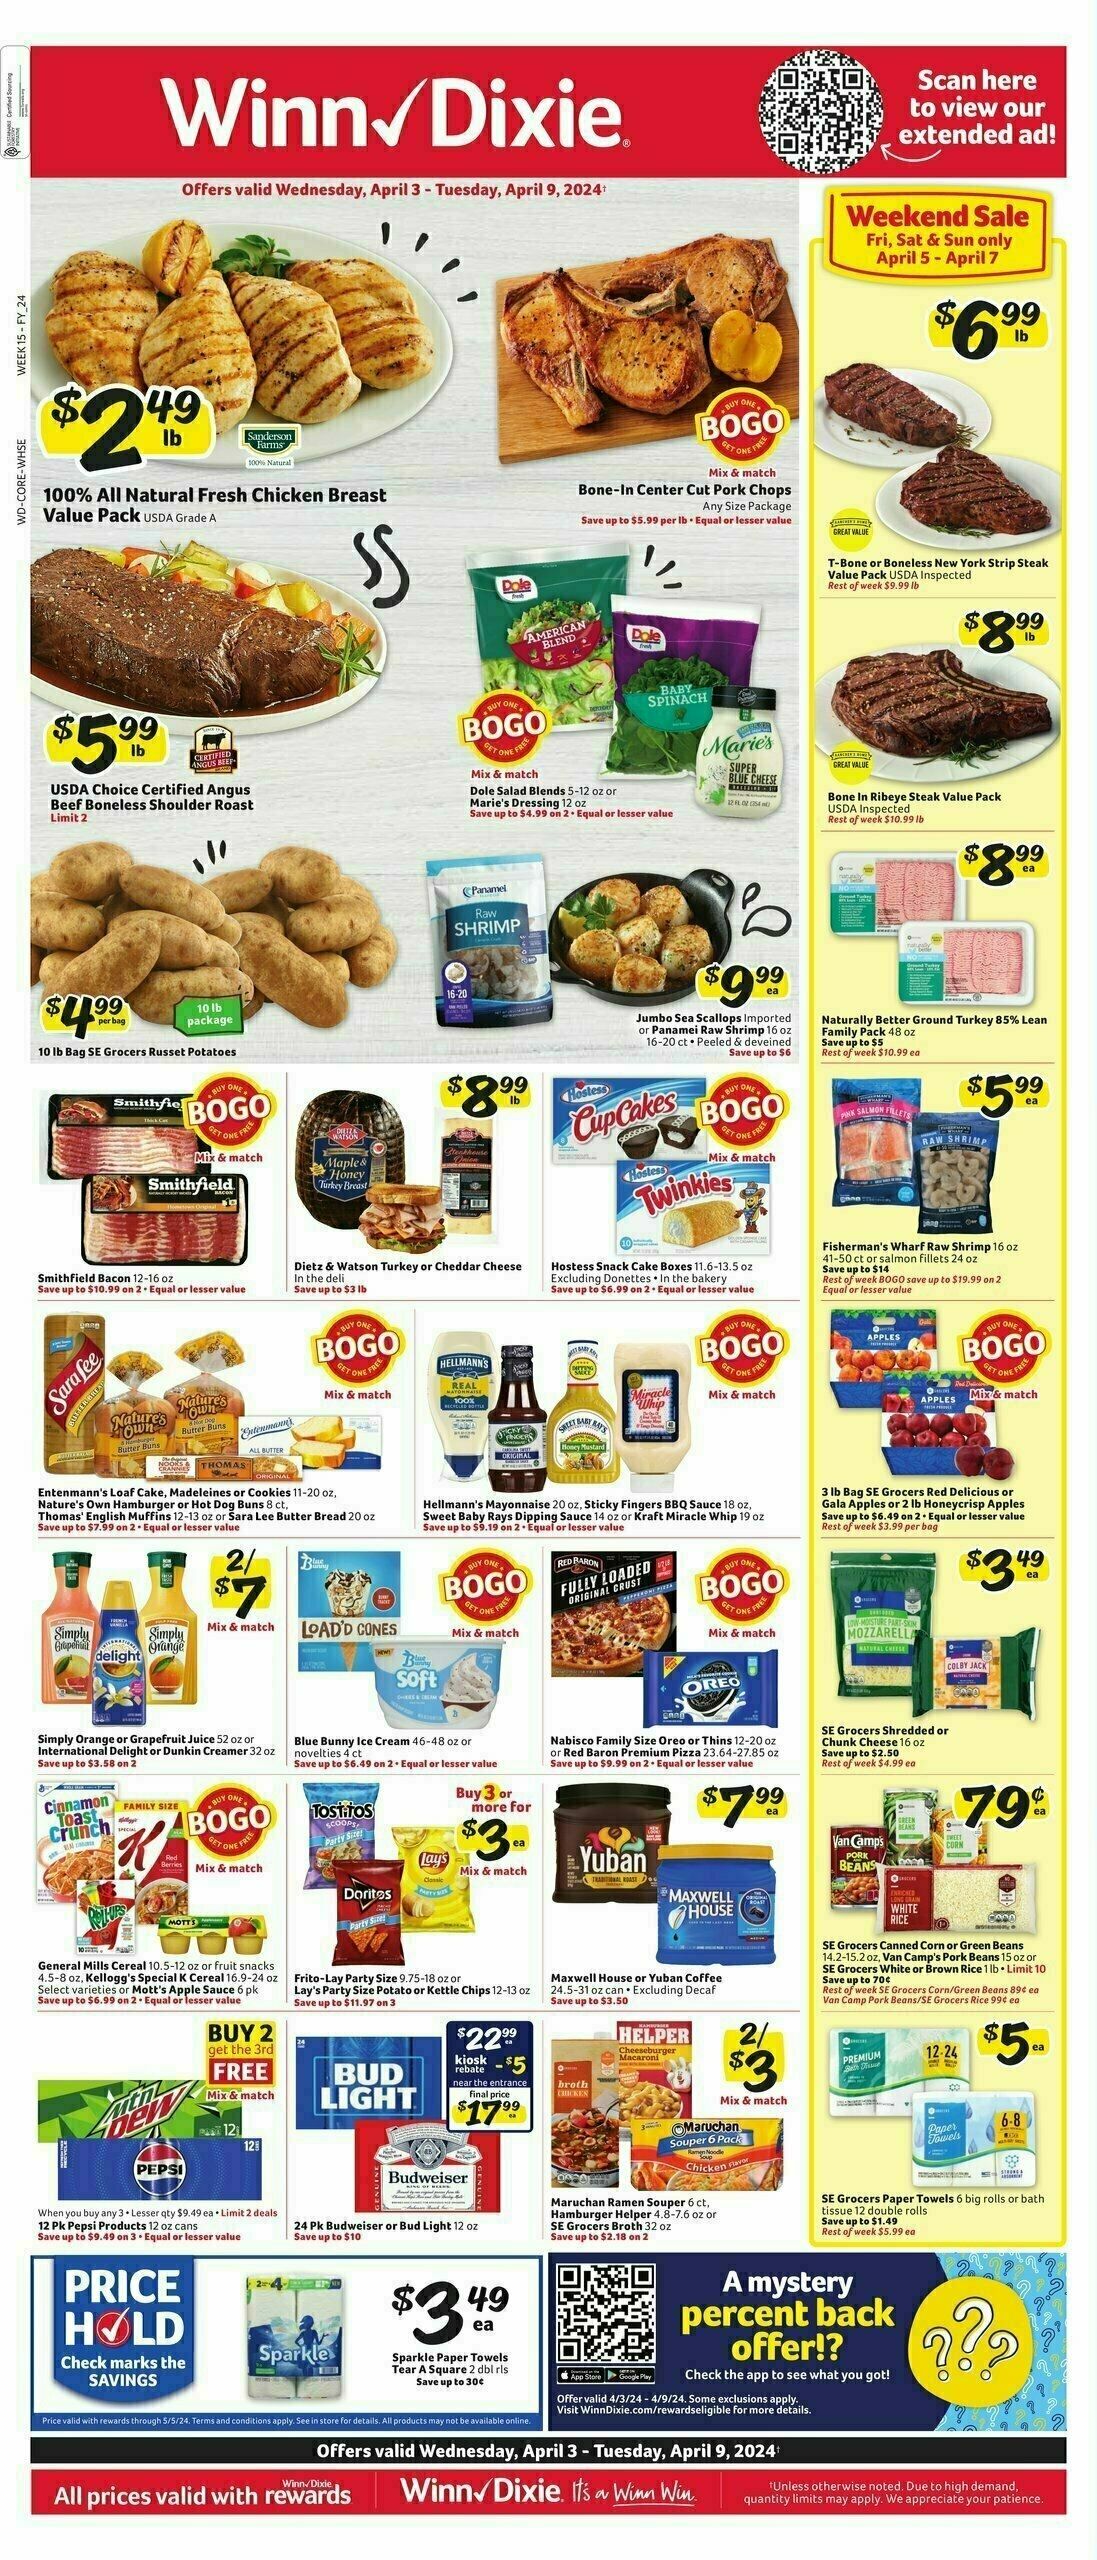 Winn-Dixie Weekly Ad from April 3